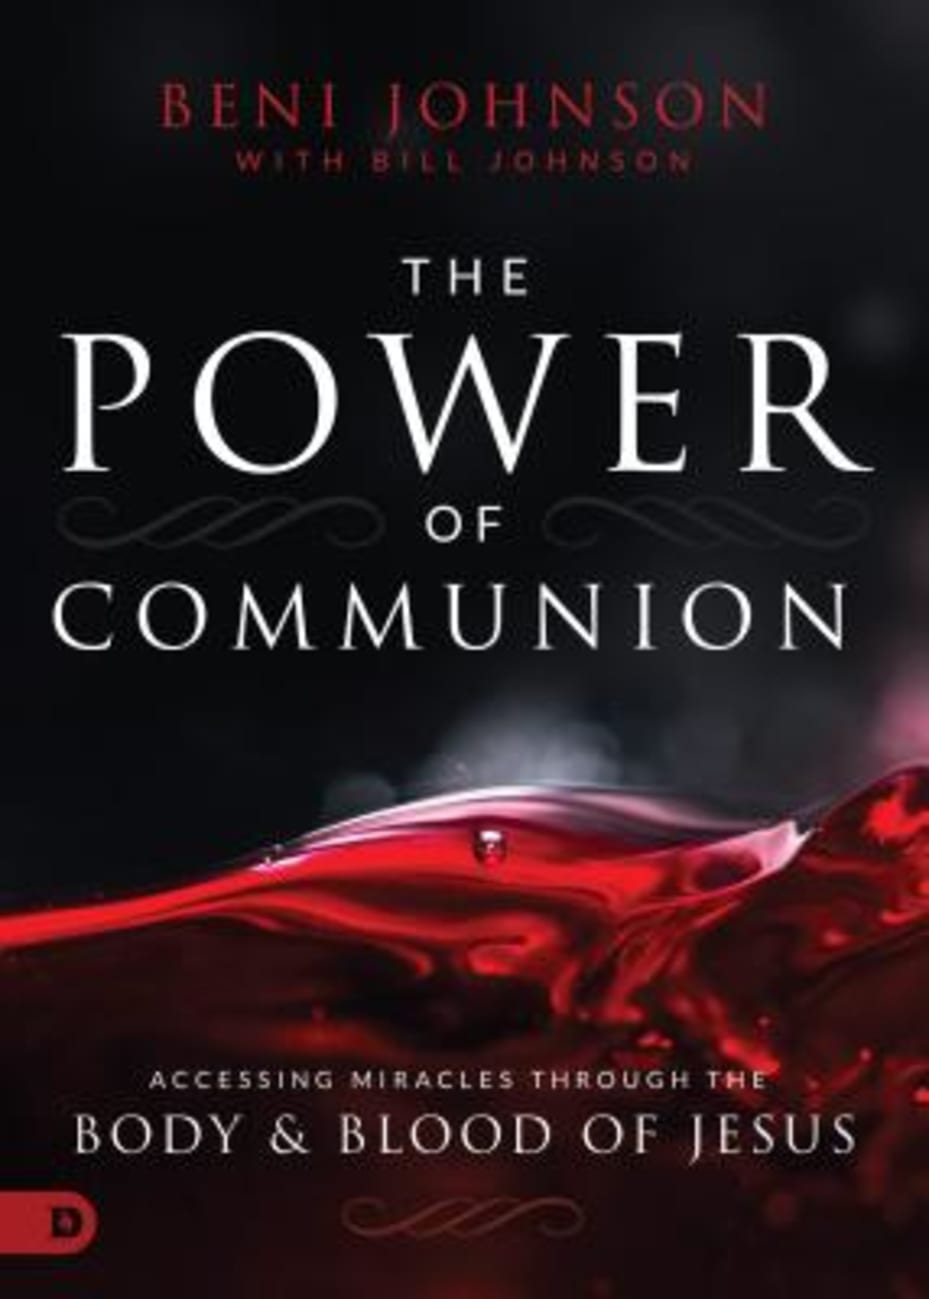 The Power of Communion: Accessing Miracles Through the Body and Blood of Jesus Hardback